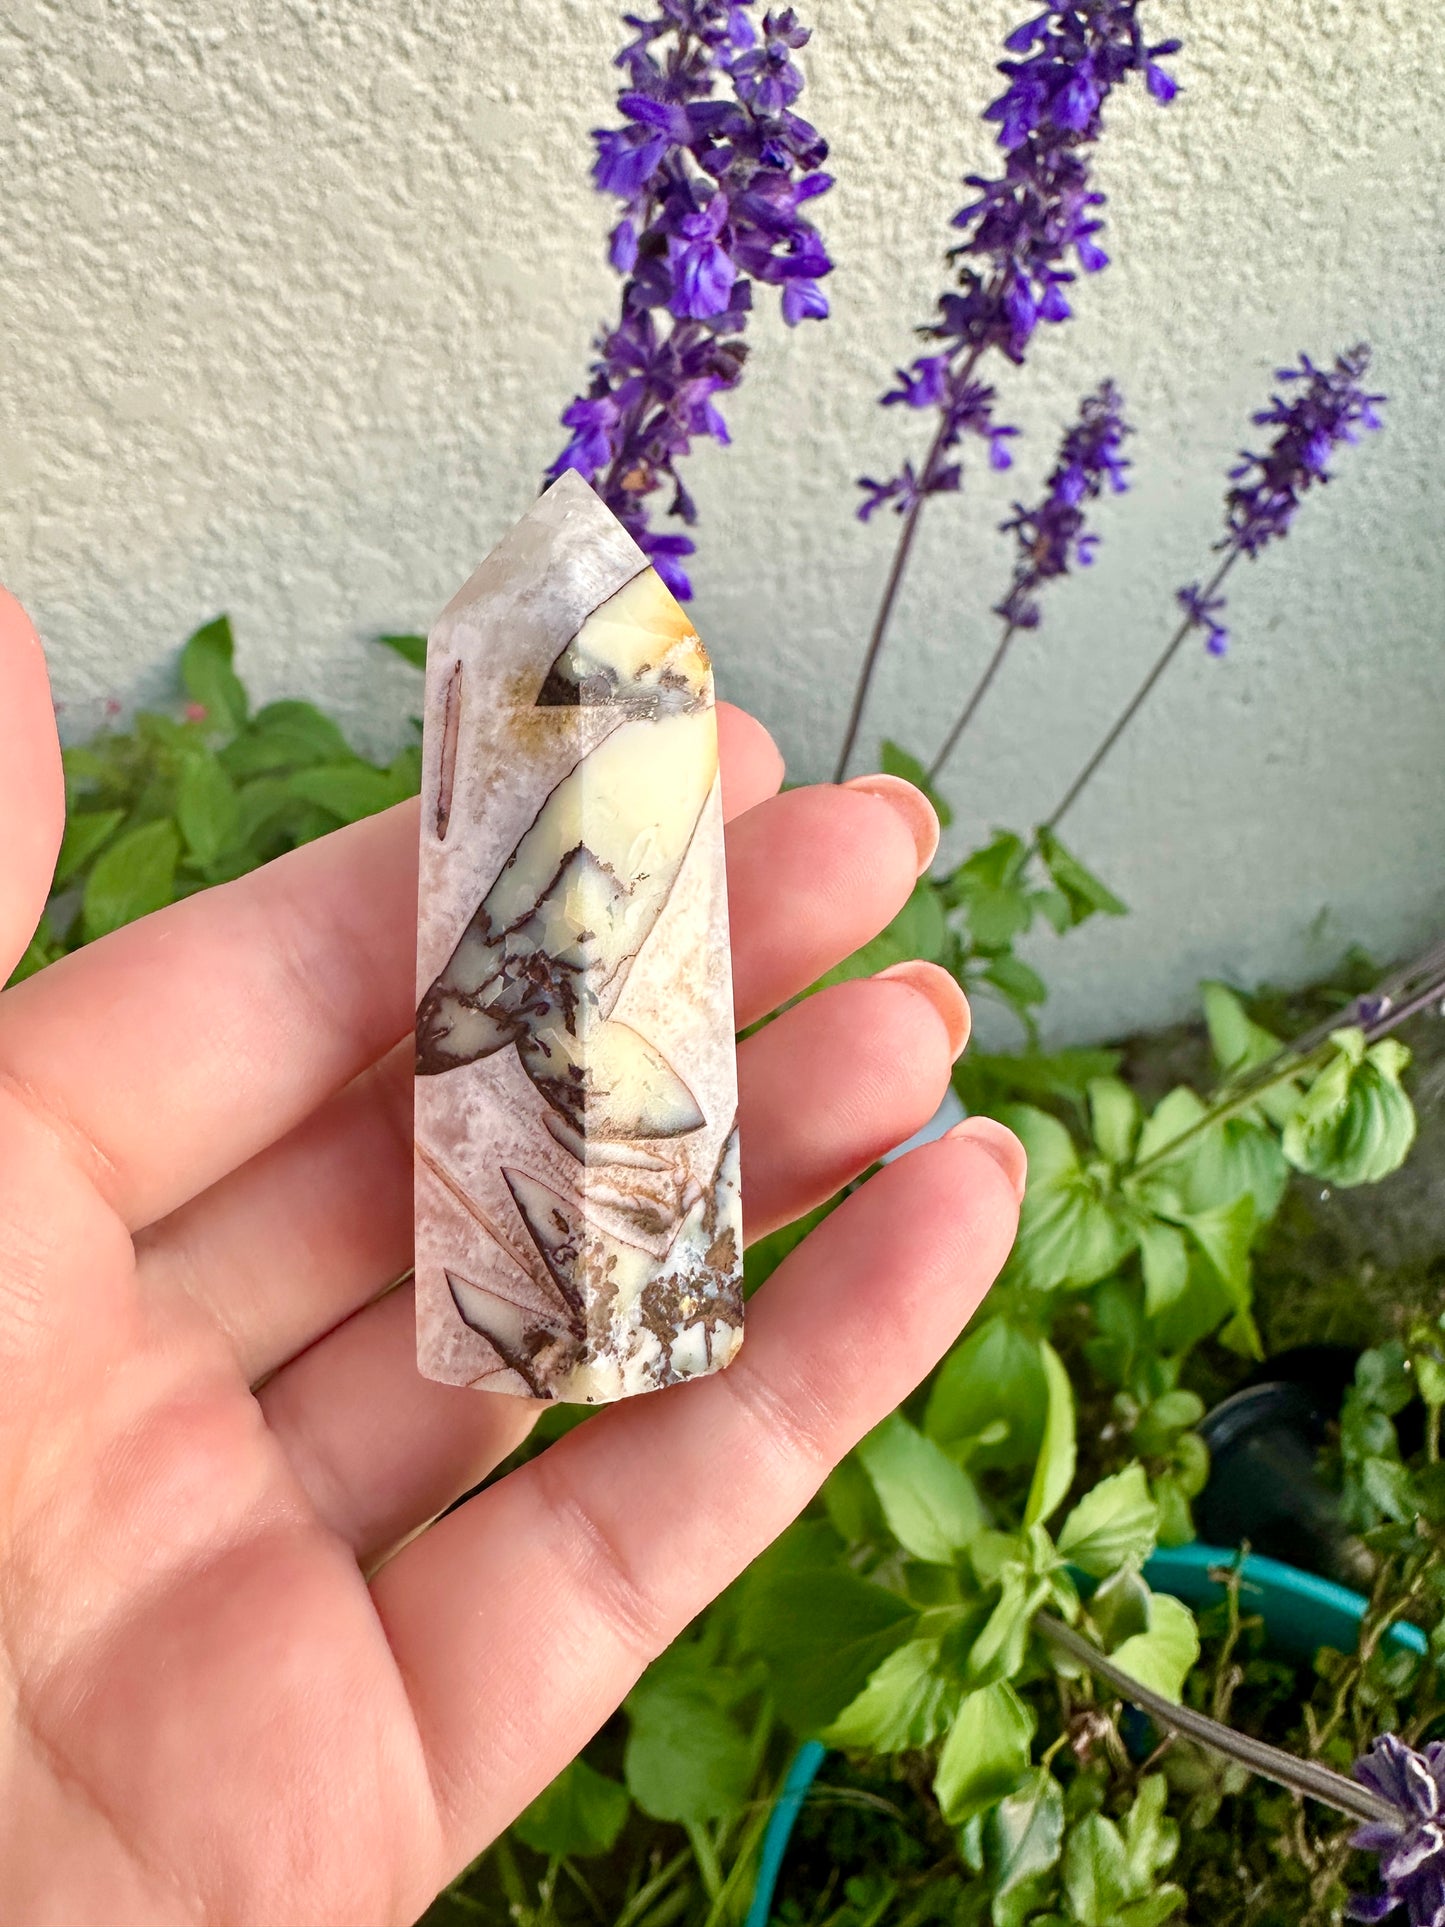 Captivating Cappuccino Agate Tower | Unique Brown and Cream Striped Mineral | Perfect for Home Decor, Healing, and Collectors